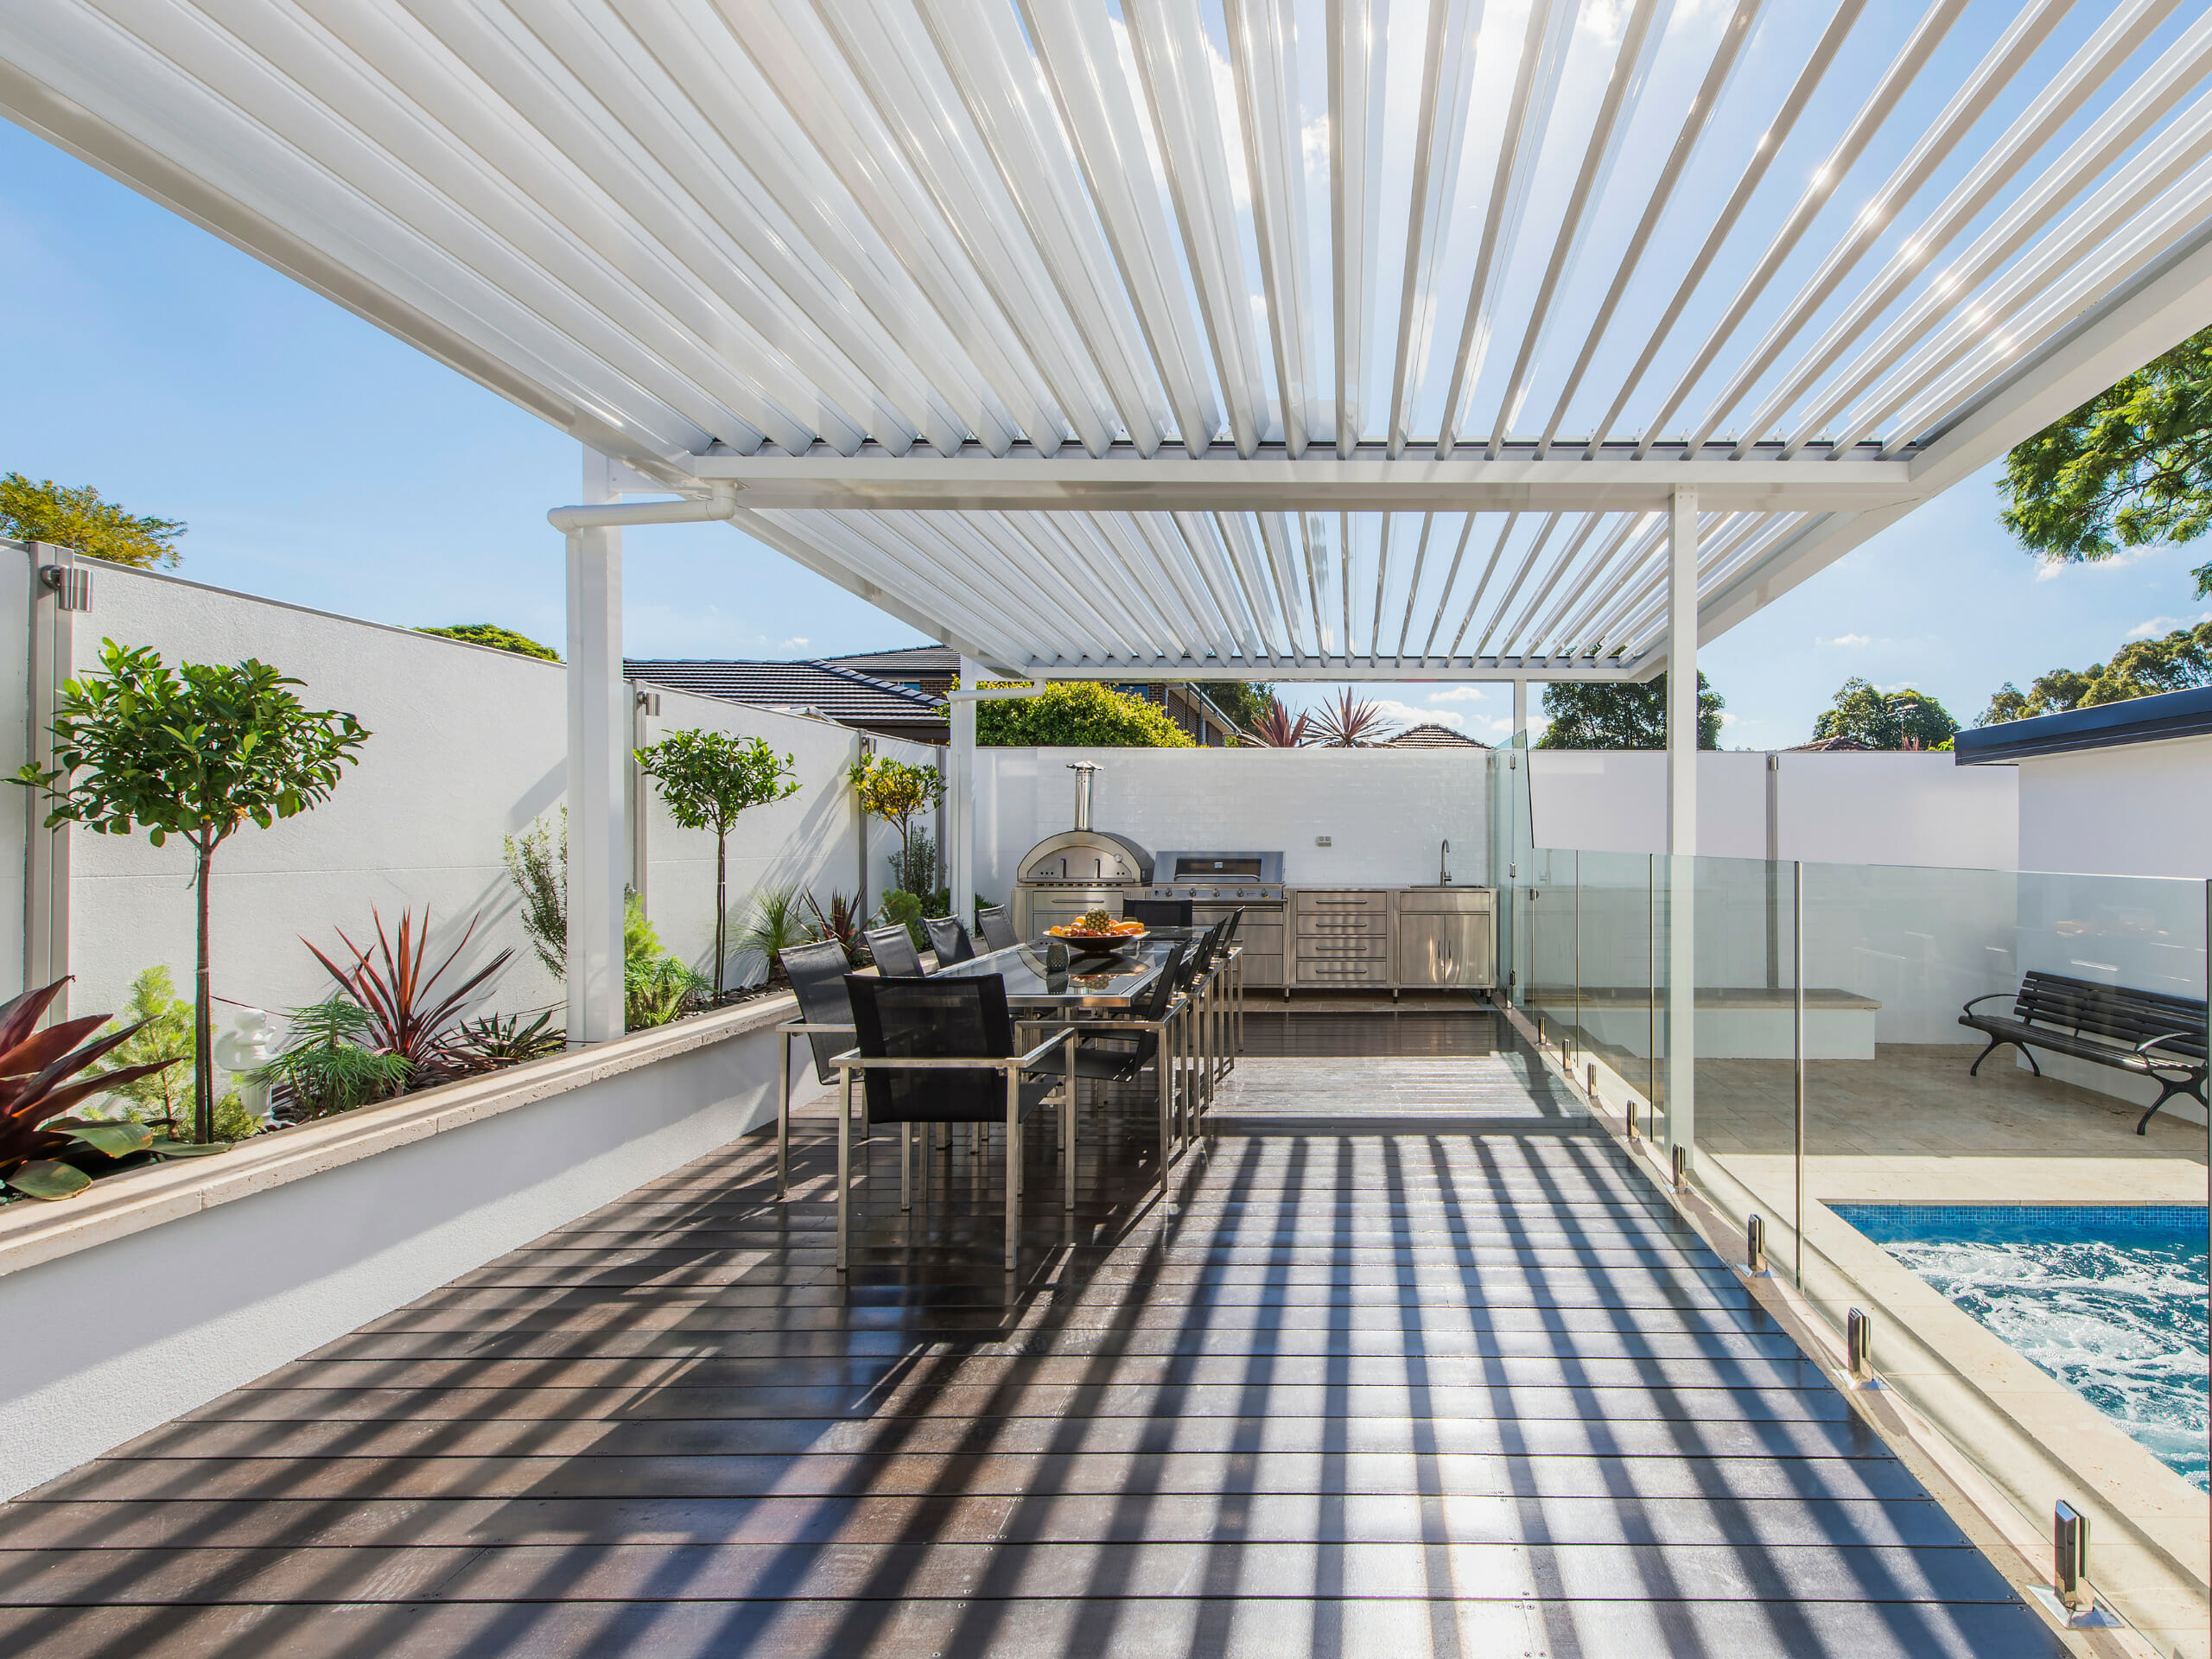 Shading is an important aspect to consider in backyard design